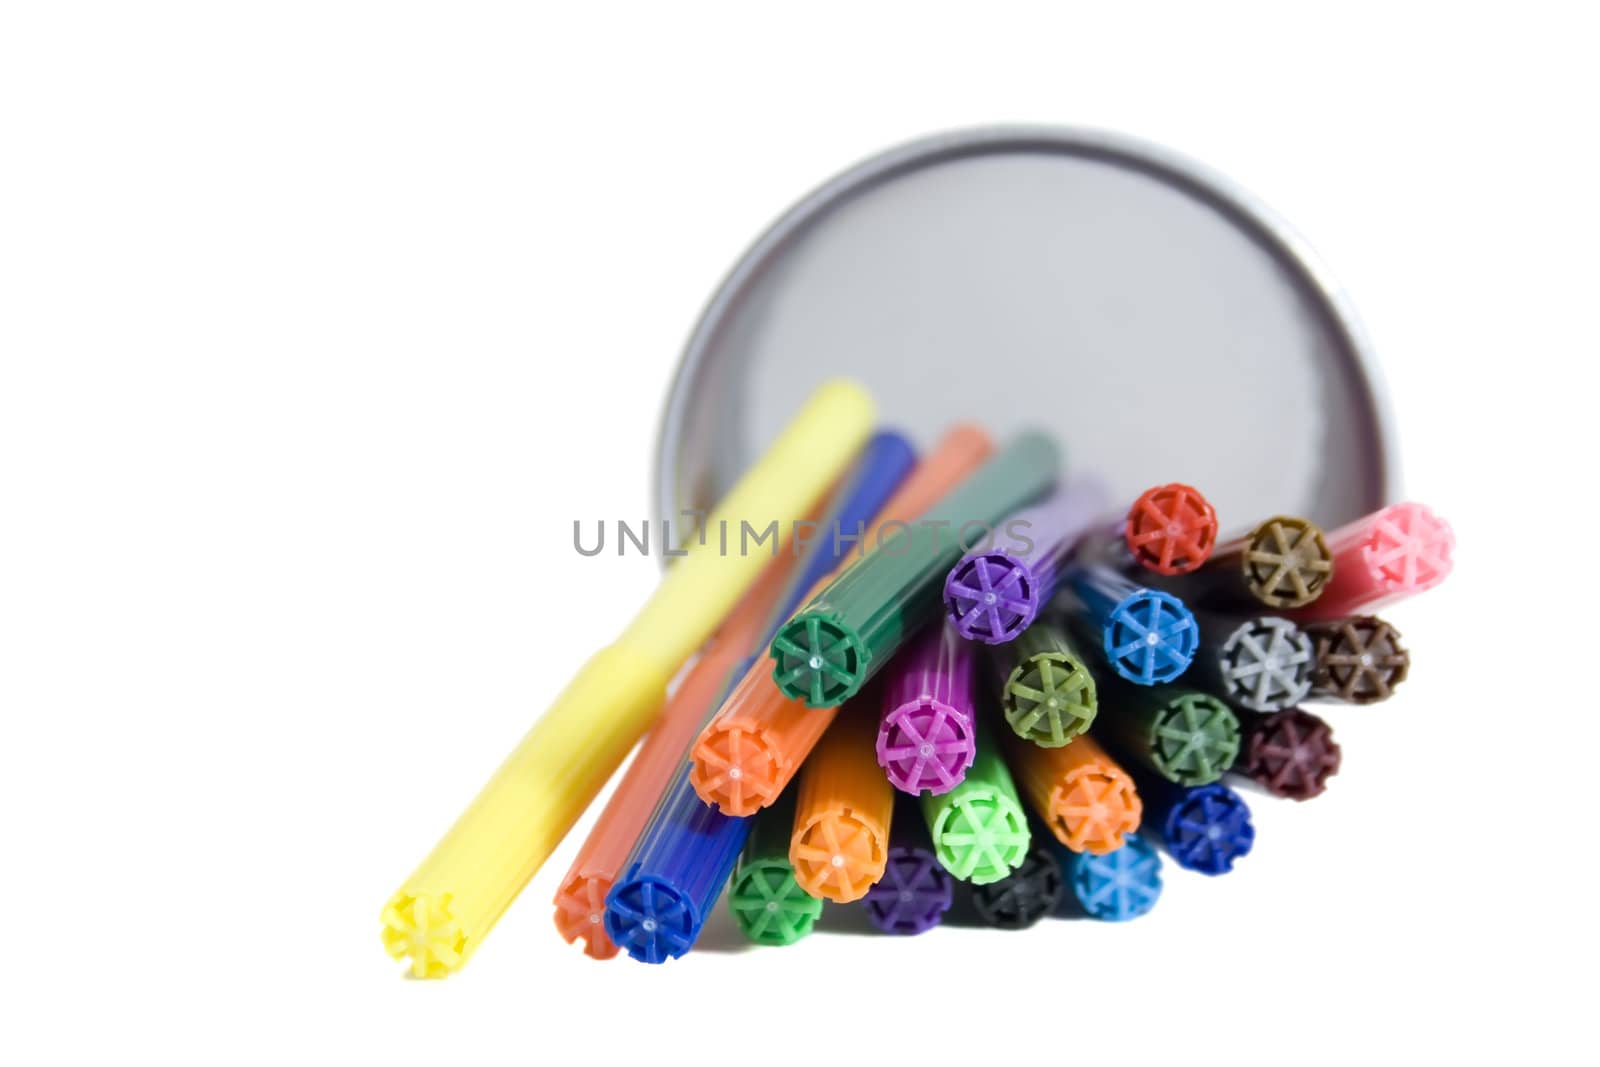 Markers lying in pencil holder by Nickondr